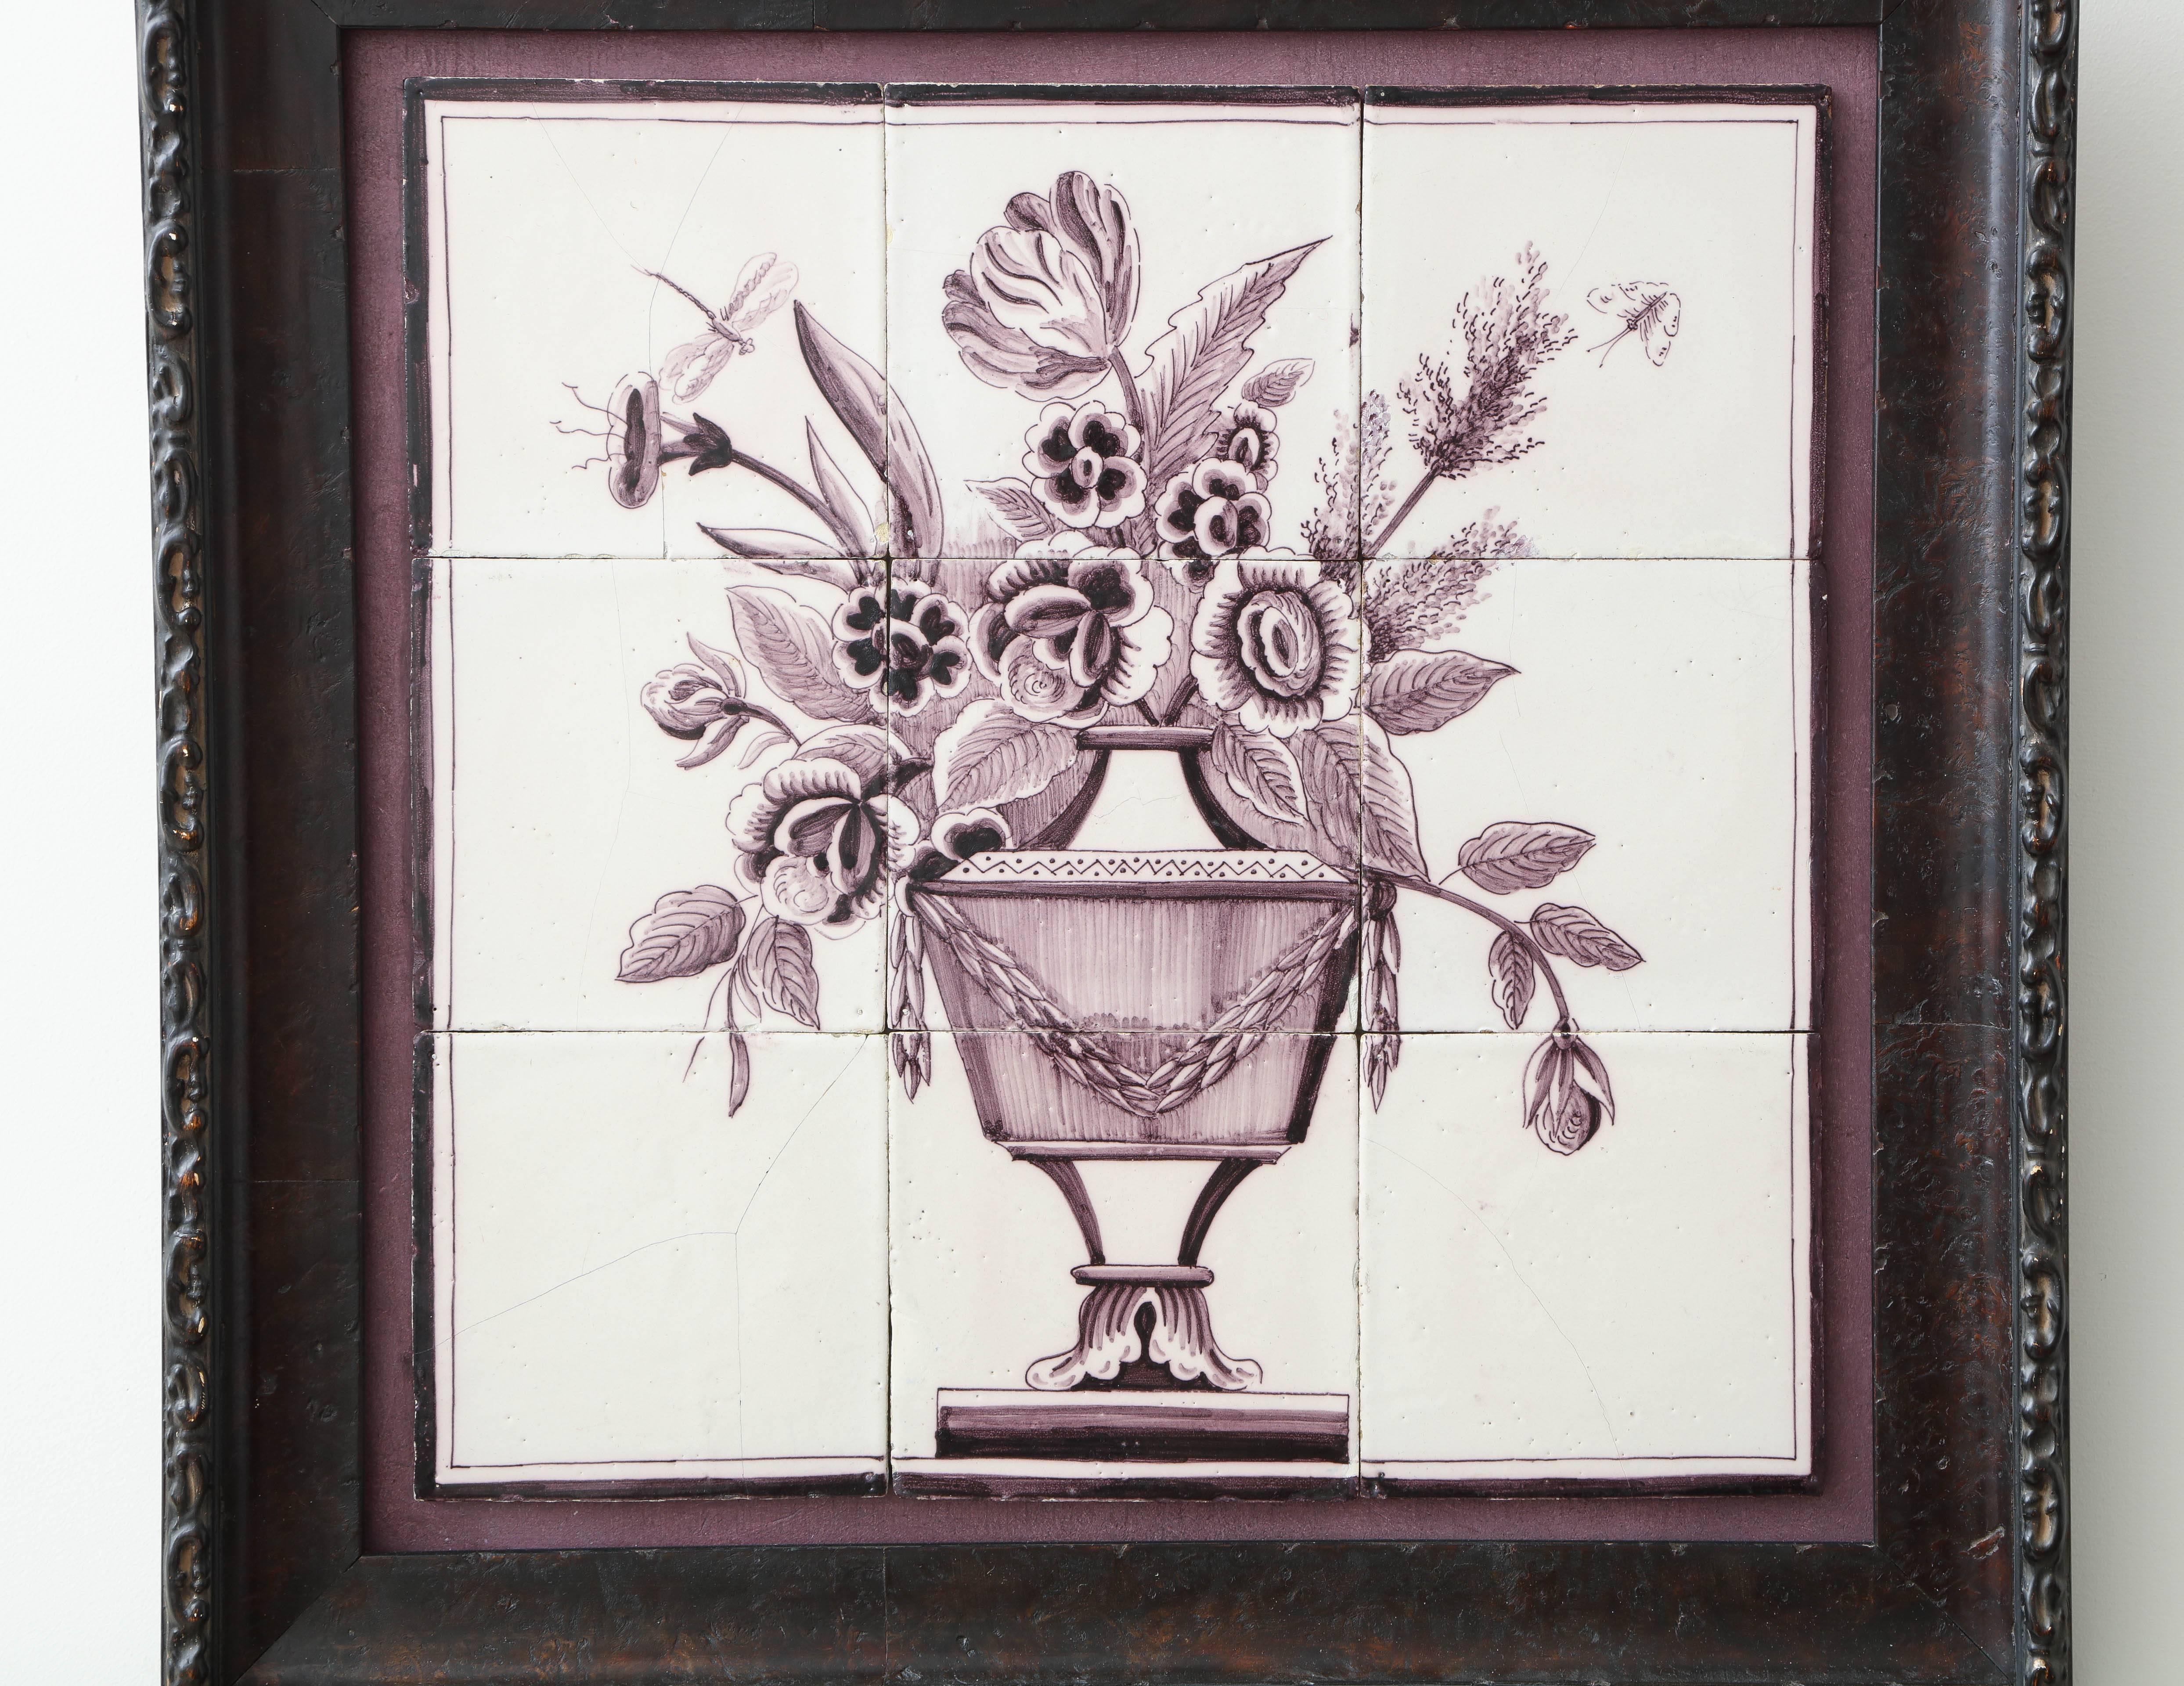 A late 18th century Dutch delft manganese tile picture of a neoclassical urn with flowers and insects in a later carved wood frame.